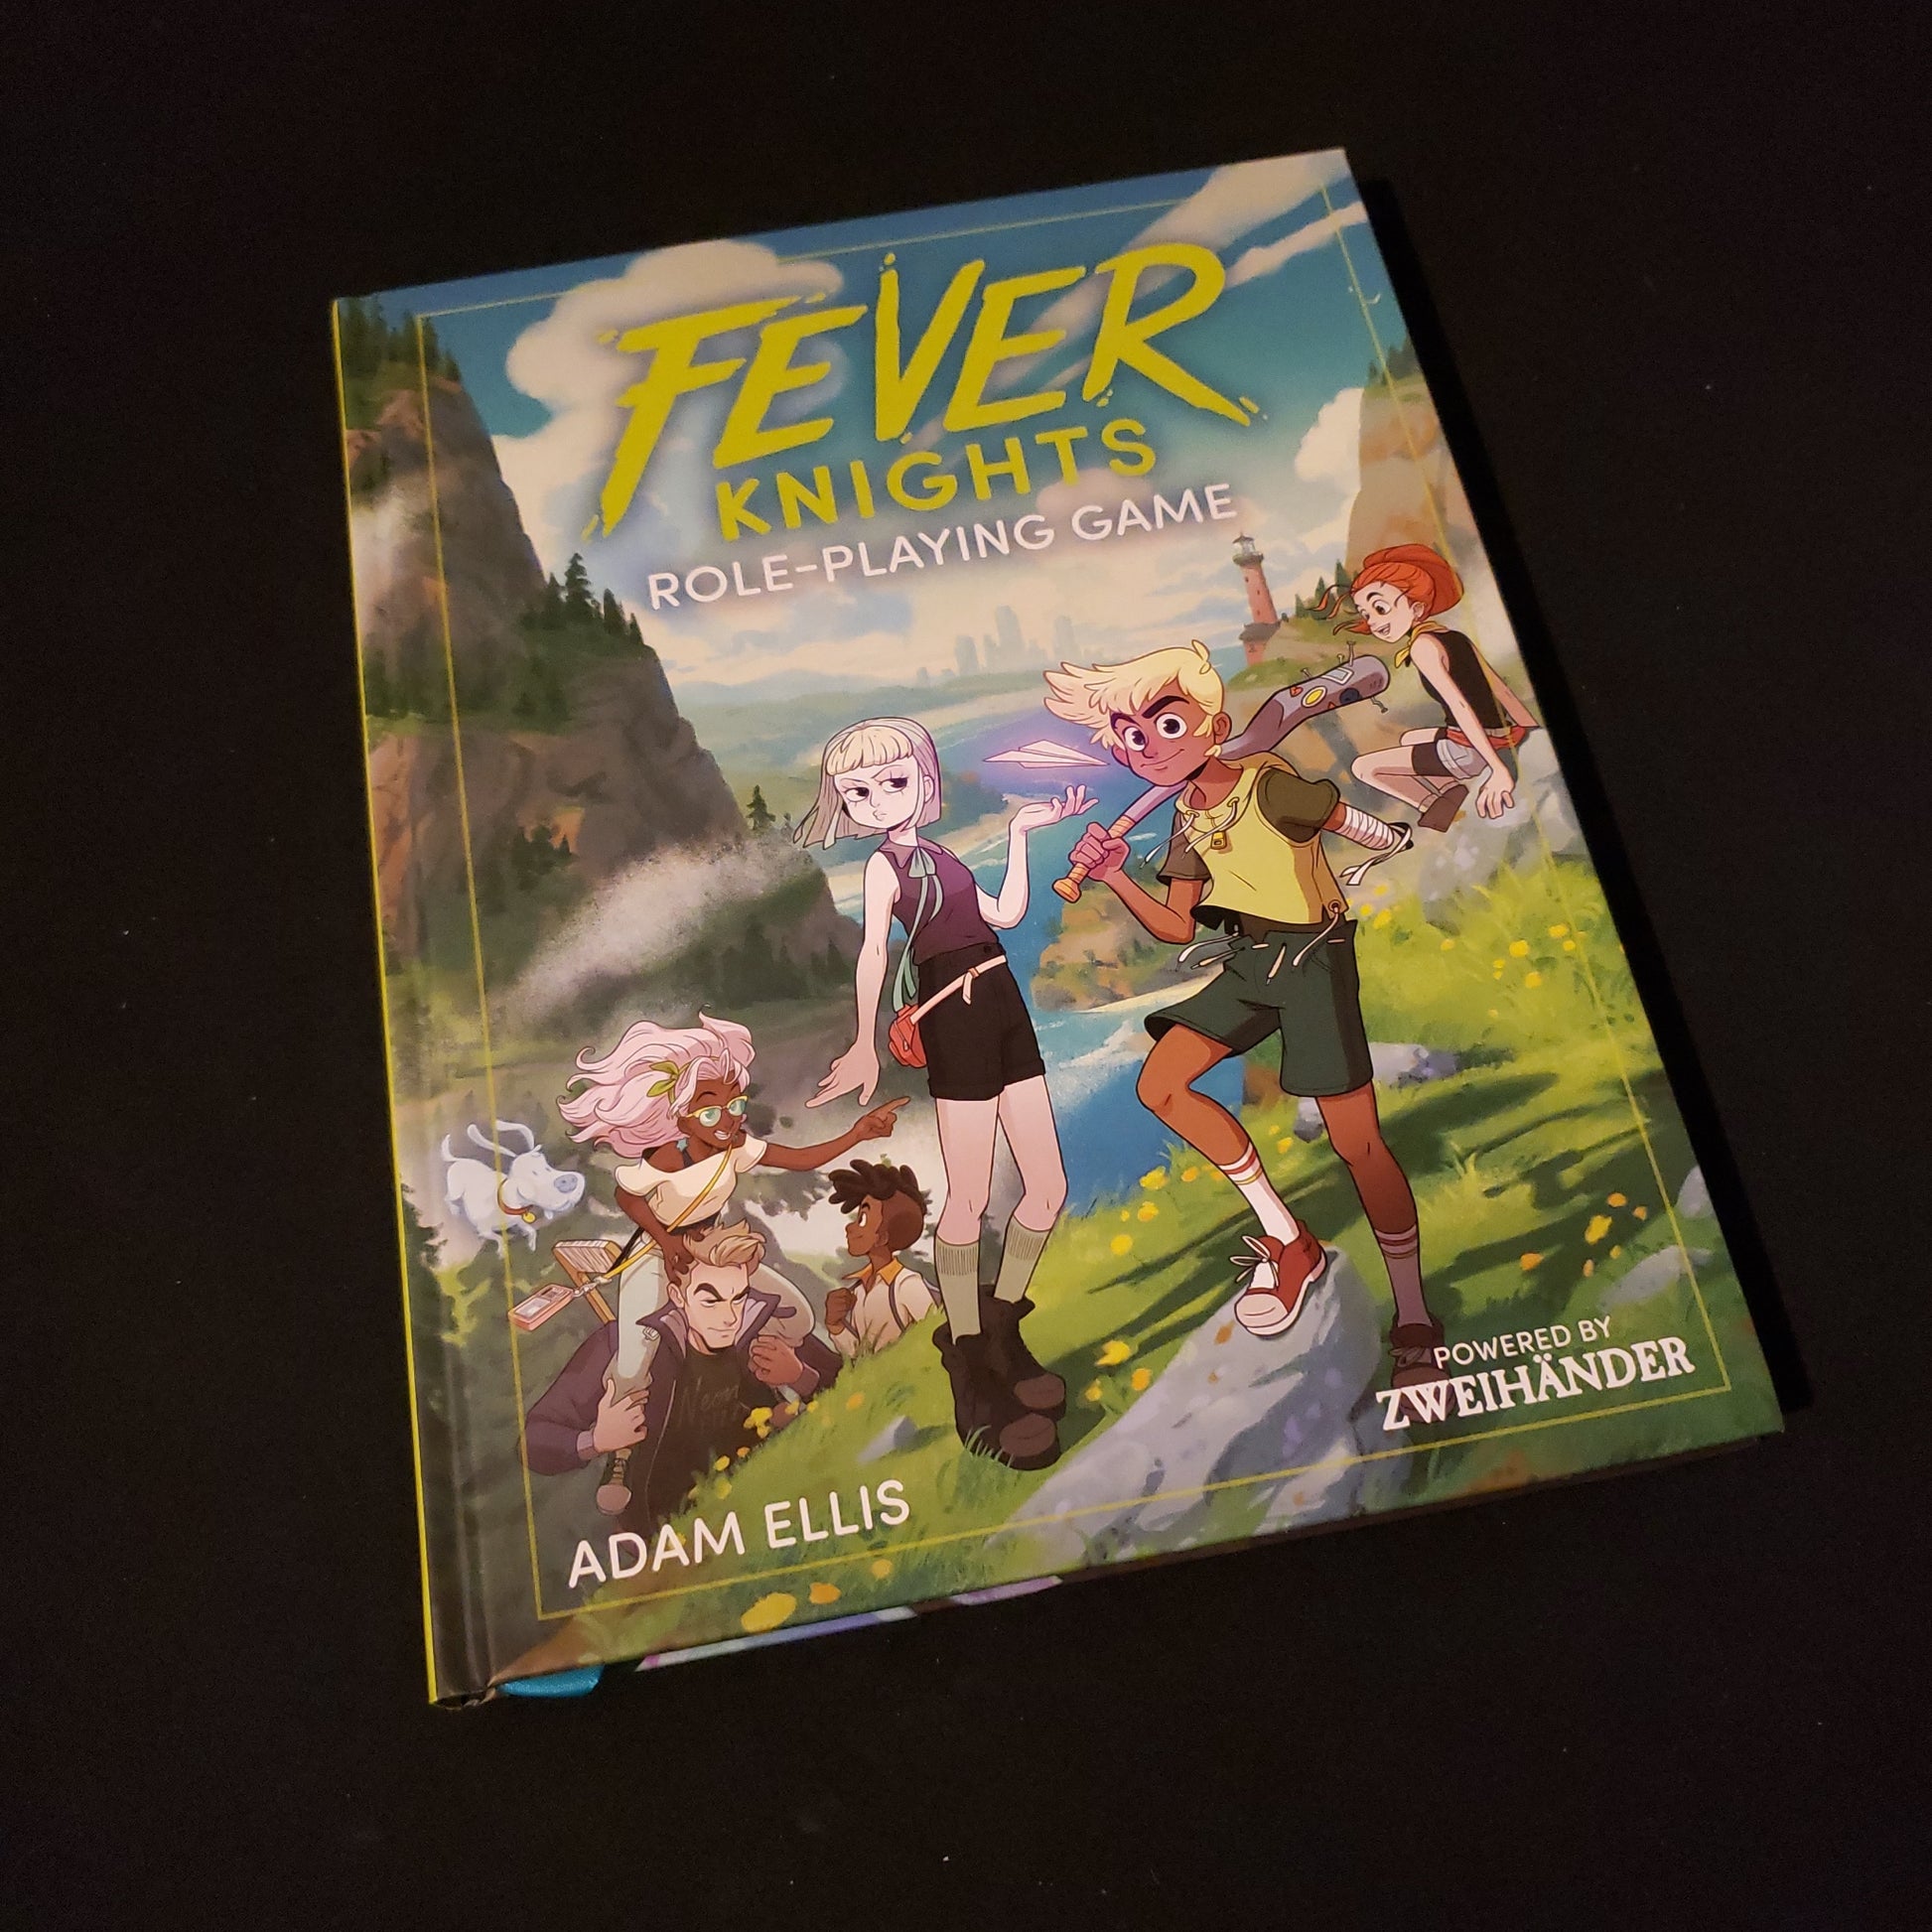 Image shows the front cover of the Fever Knights roleplaying game book